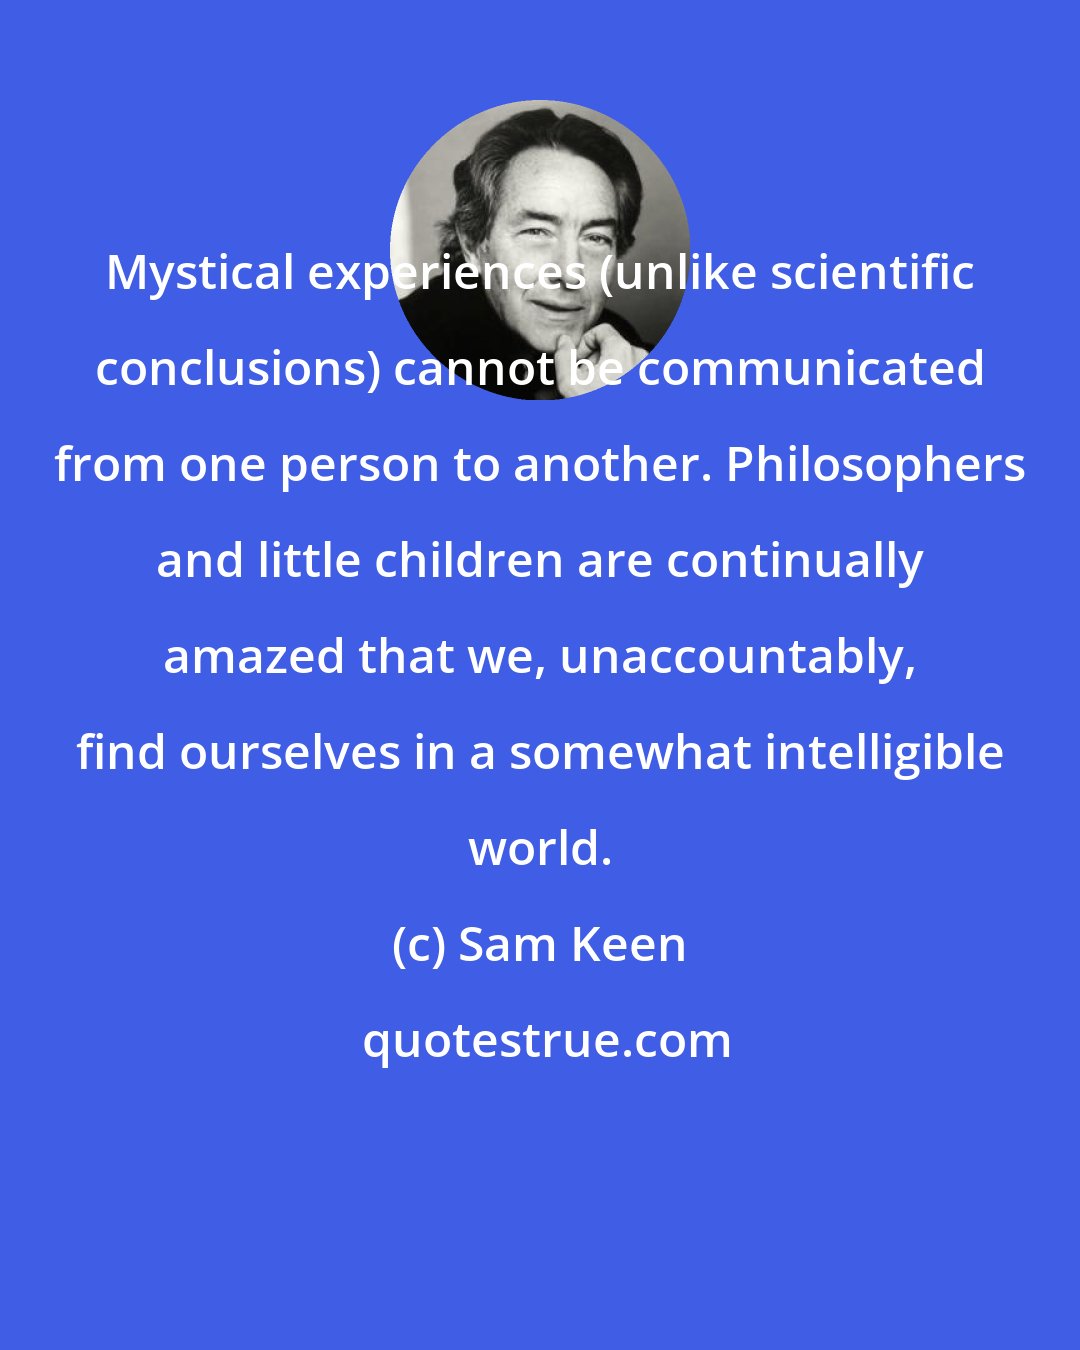 Sam Keen: Mystical experiences (unlike scientific conclusions) cannot be communicated from one person to another. Philosophers and little children are continually amazed that we, unaccountably, find ourselves in a somewhat intelligible world.